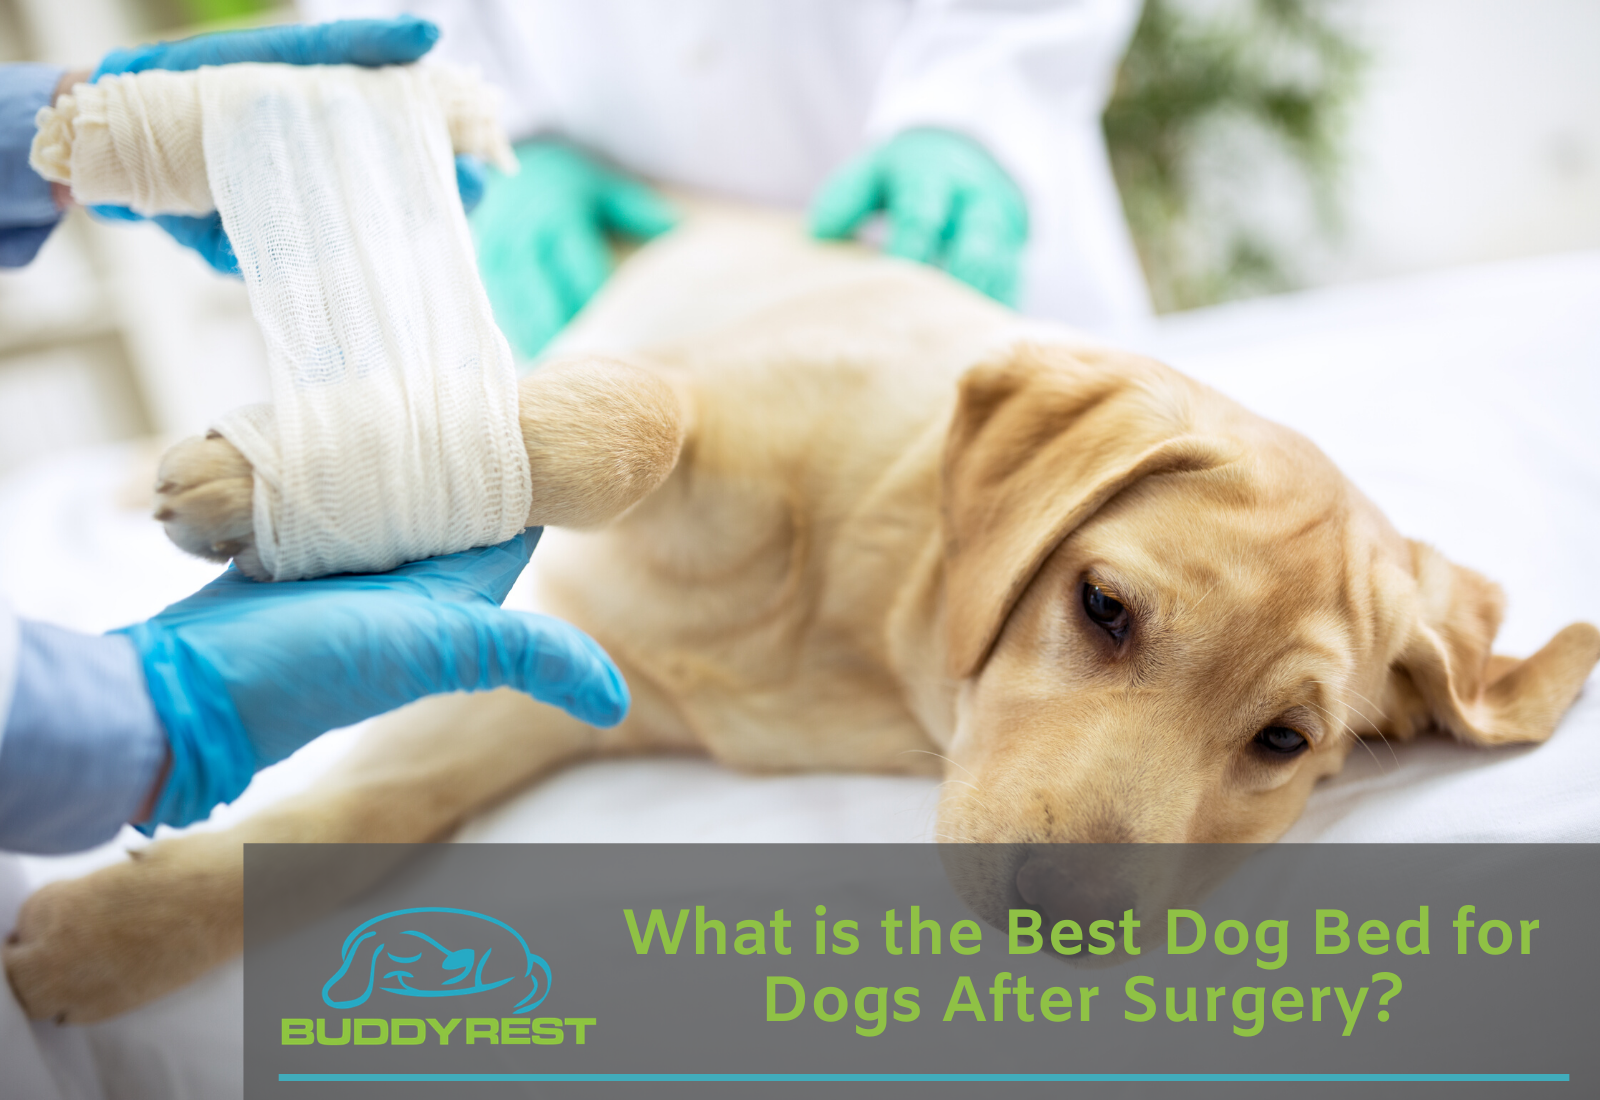 What is the Best Dog Bed for Dogs After Surgery?